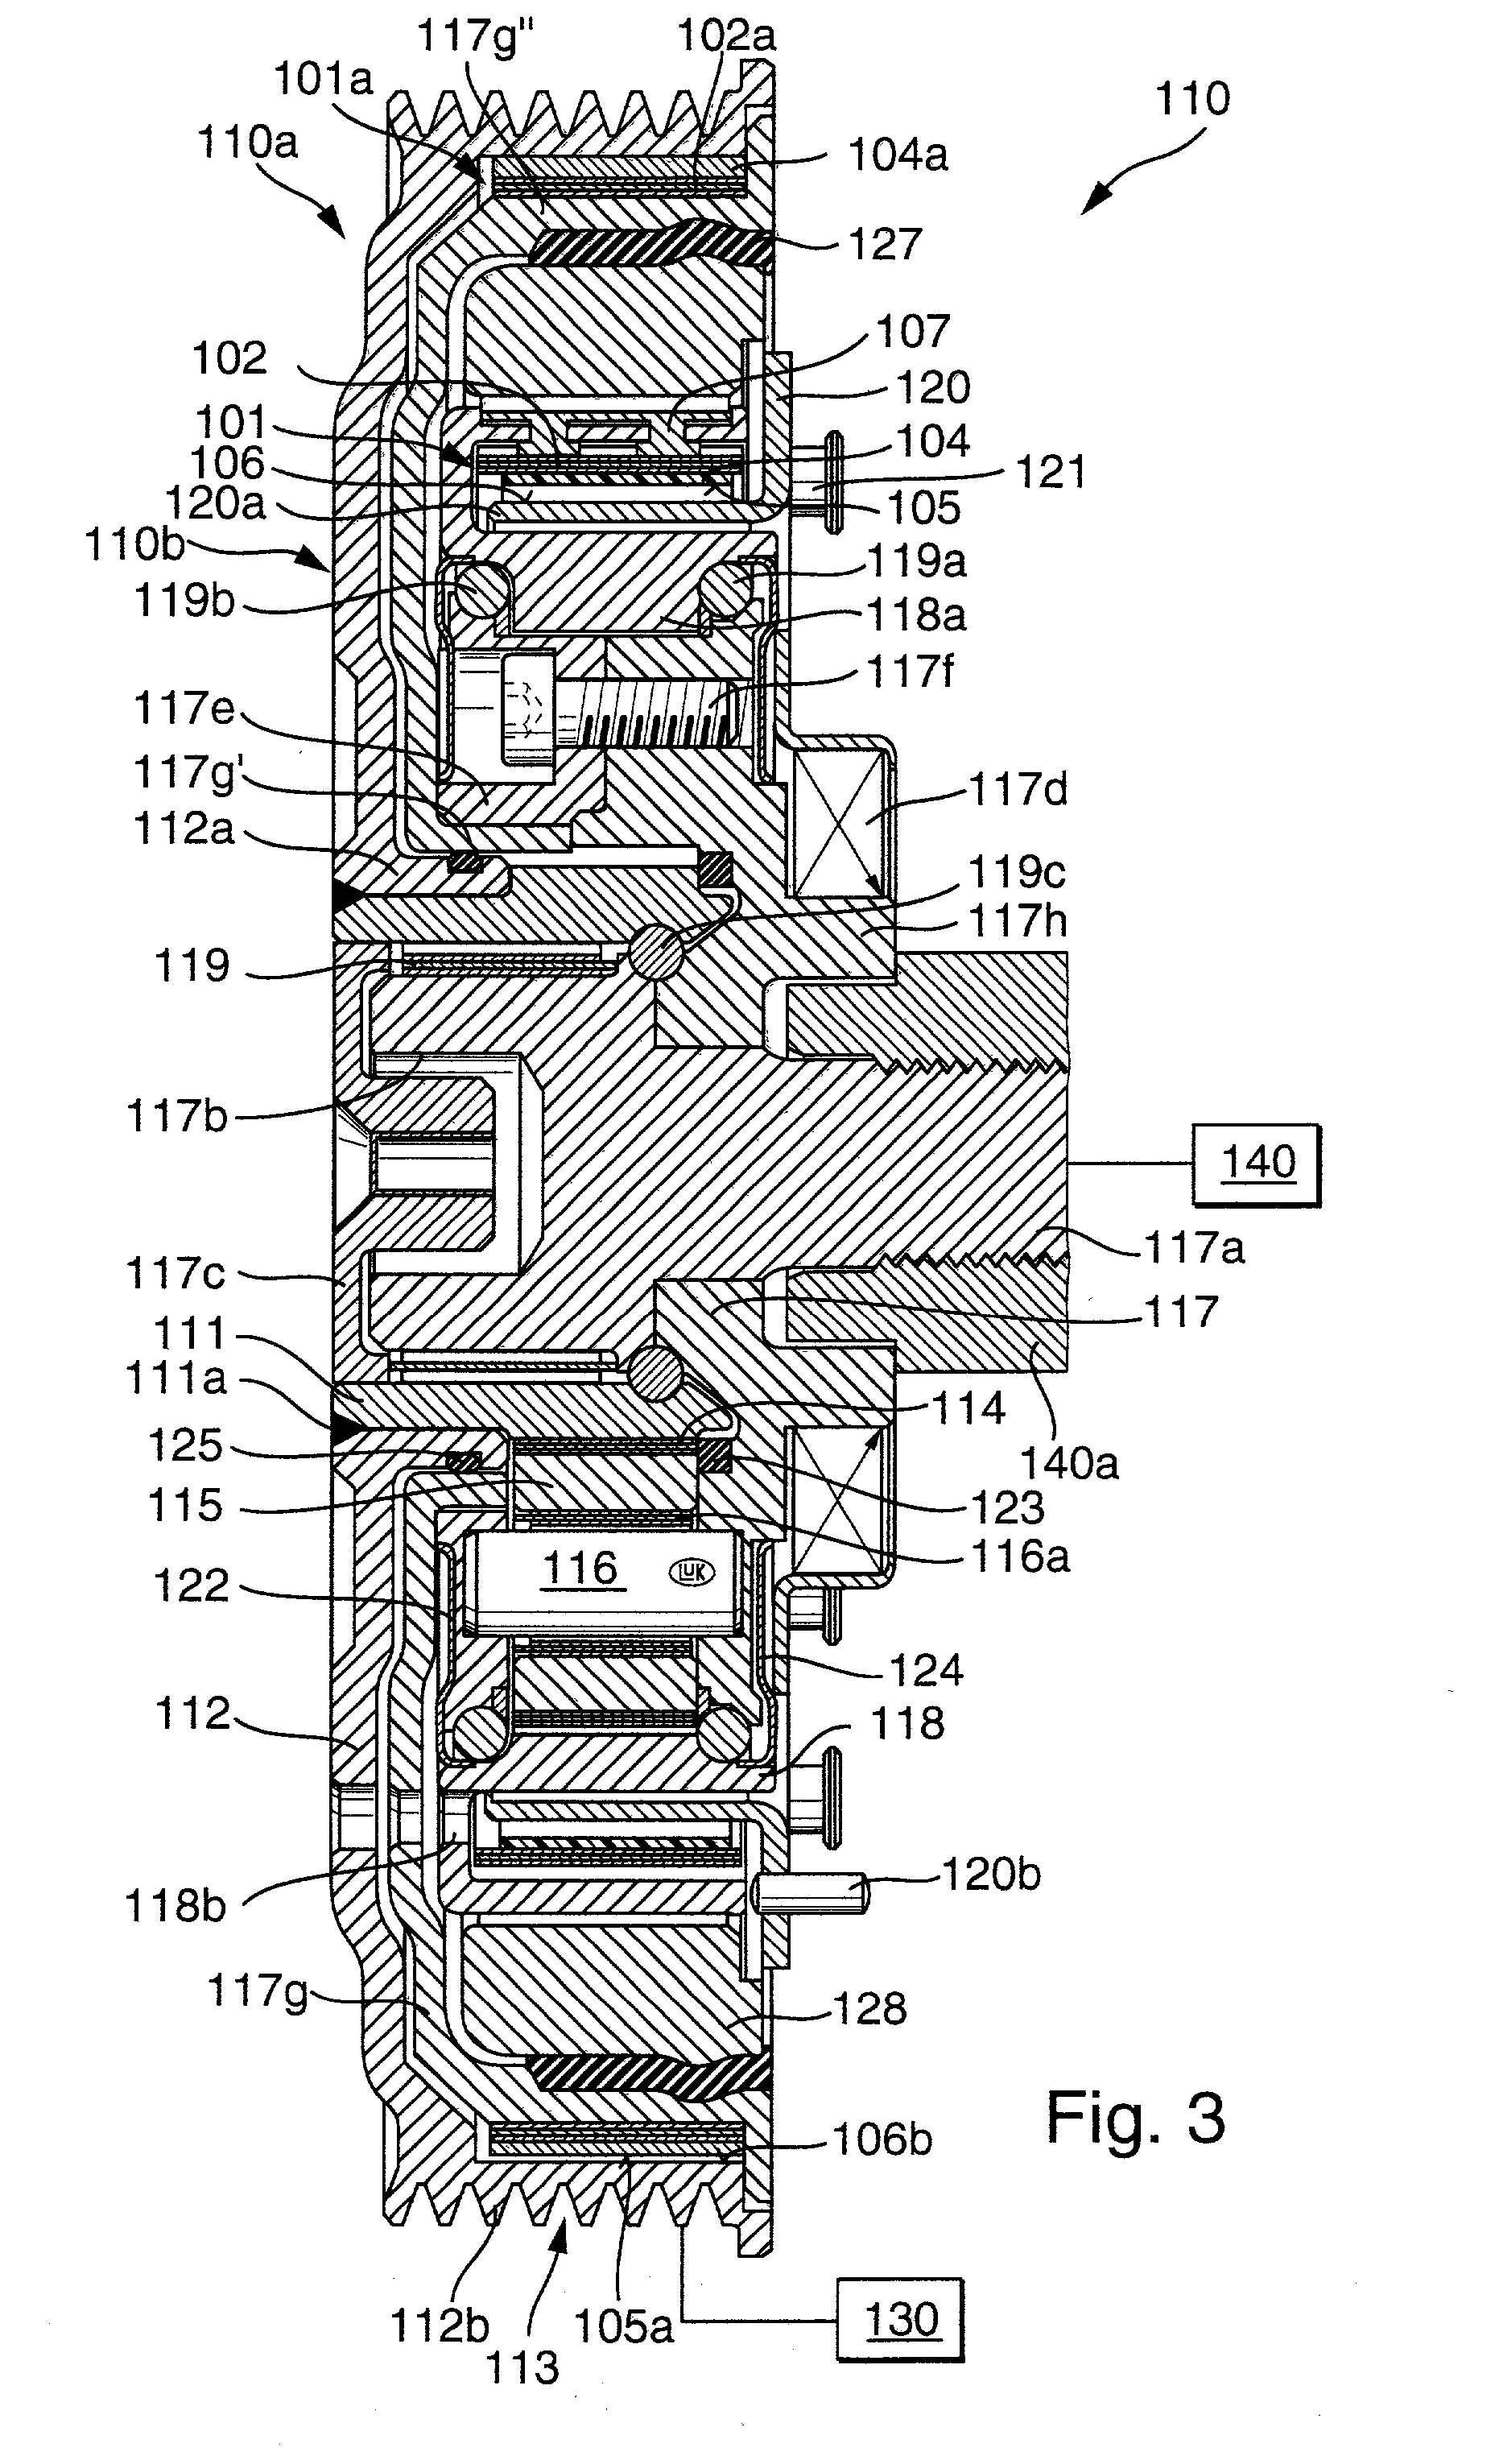 Transmission for use in the power trains of motor vehicles